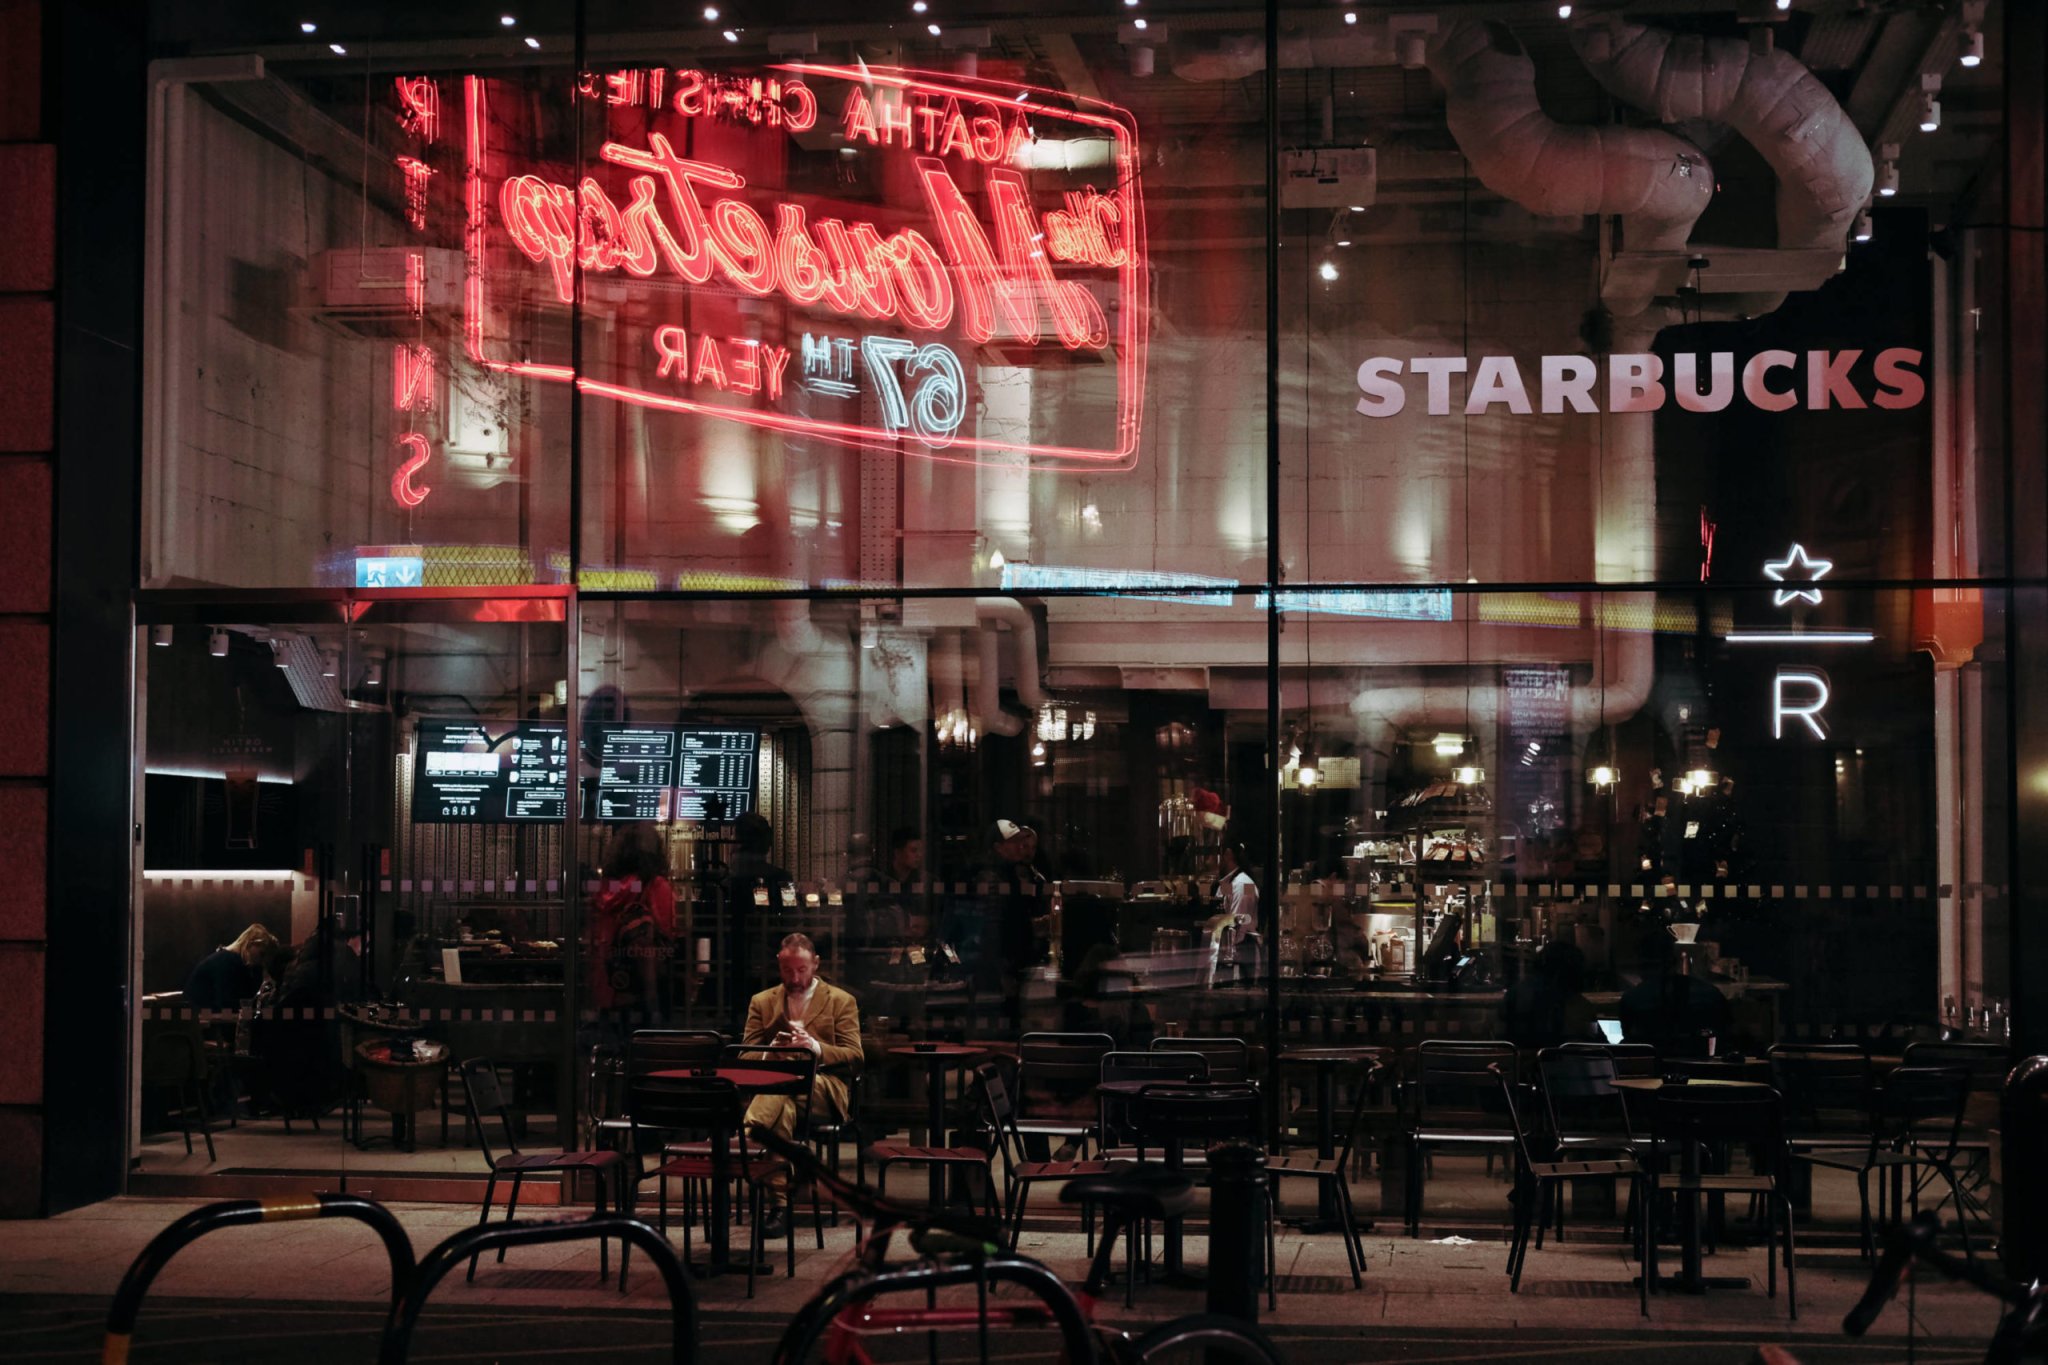 How To Shoot Street Photography at Night and be Creative